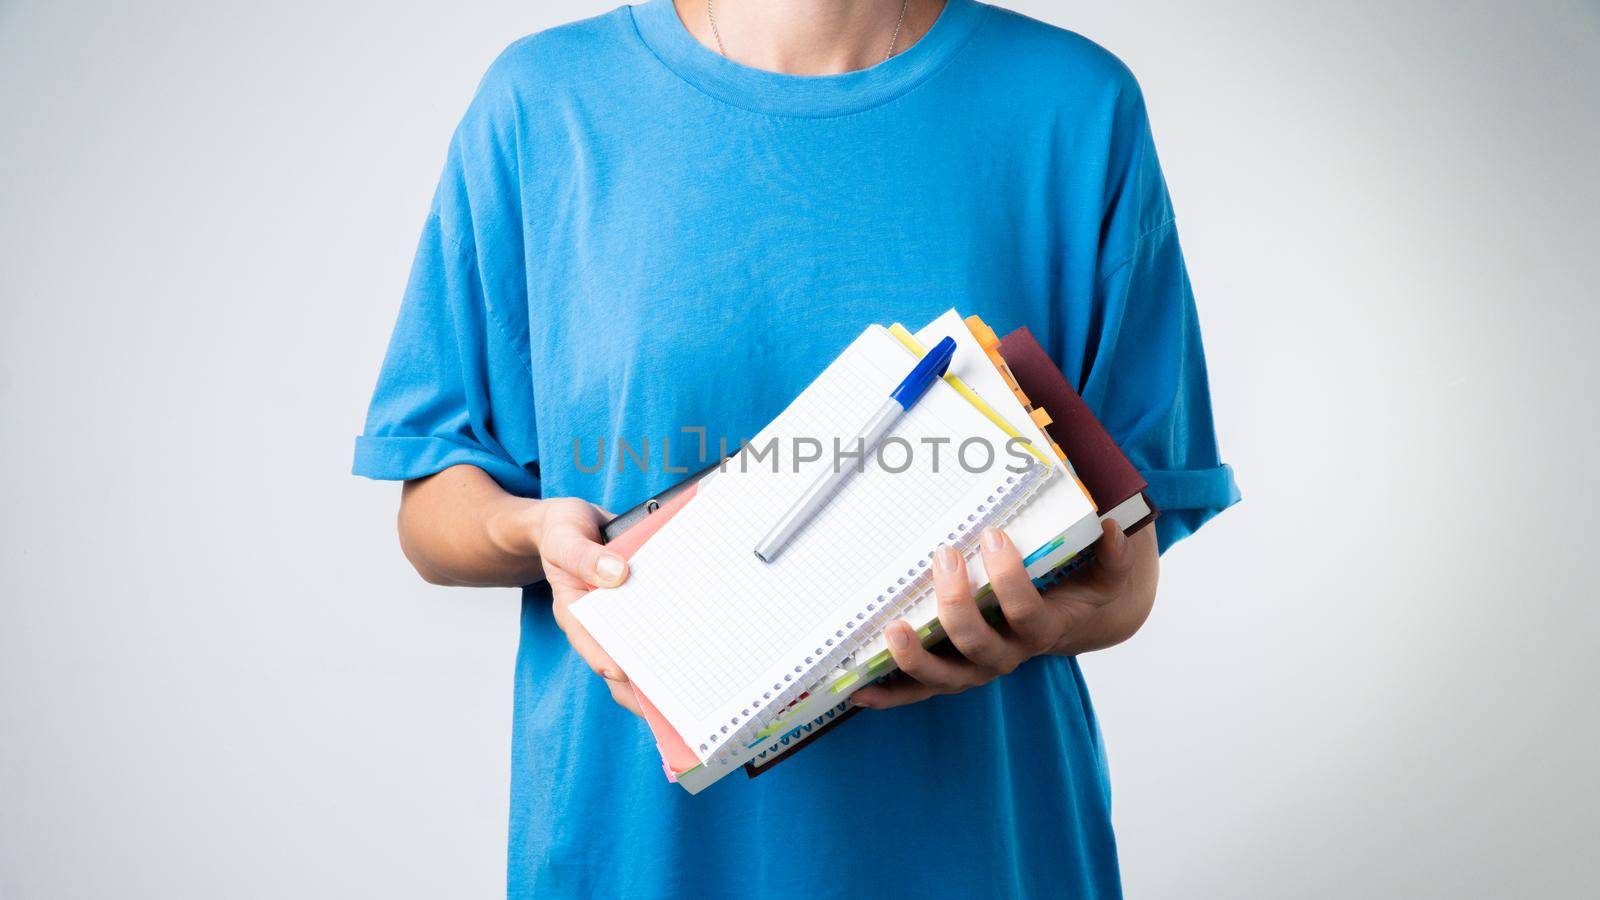 Women's hands hold notebooks, notepads, textbooks, books and a pen for studying. High quality photo